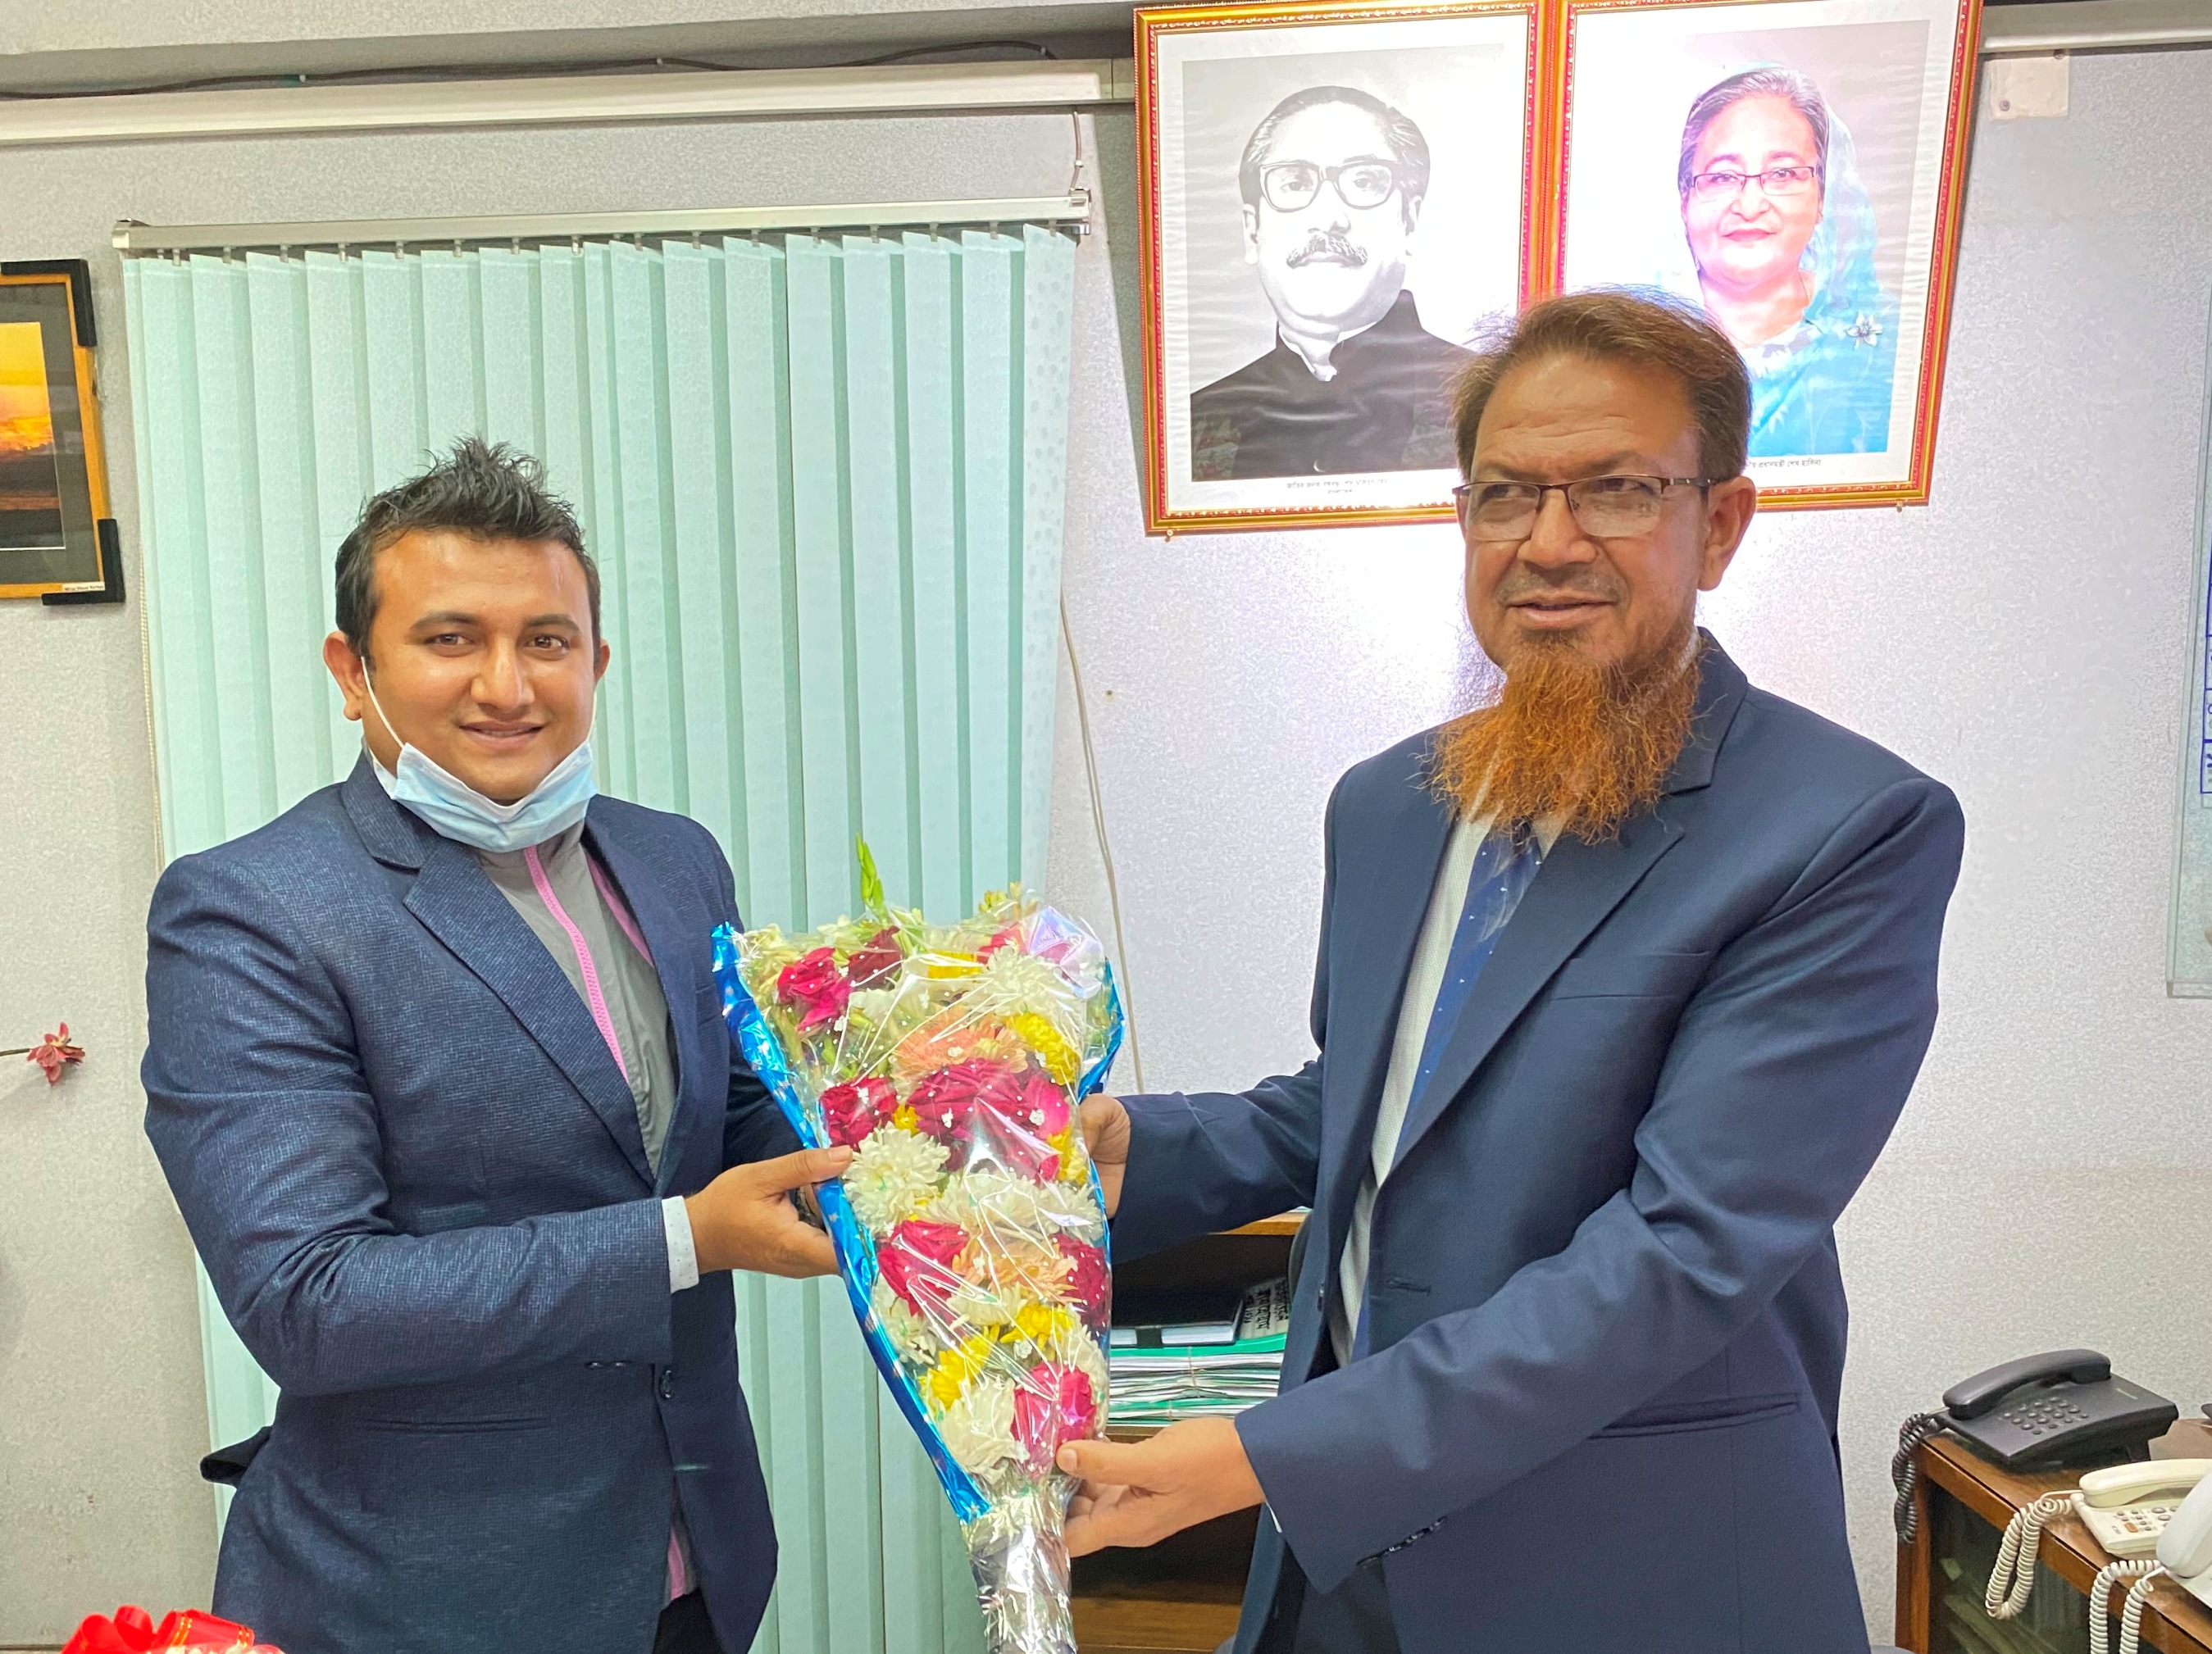 Reception to Principal Prof. Dr. Md. Abu Masud by Physical Education Department